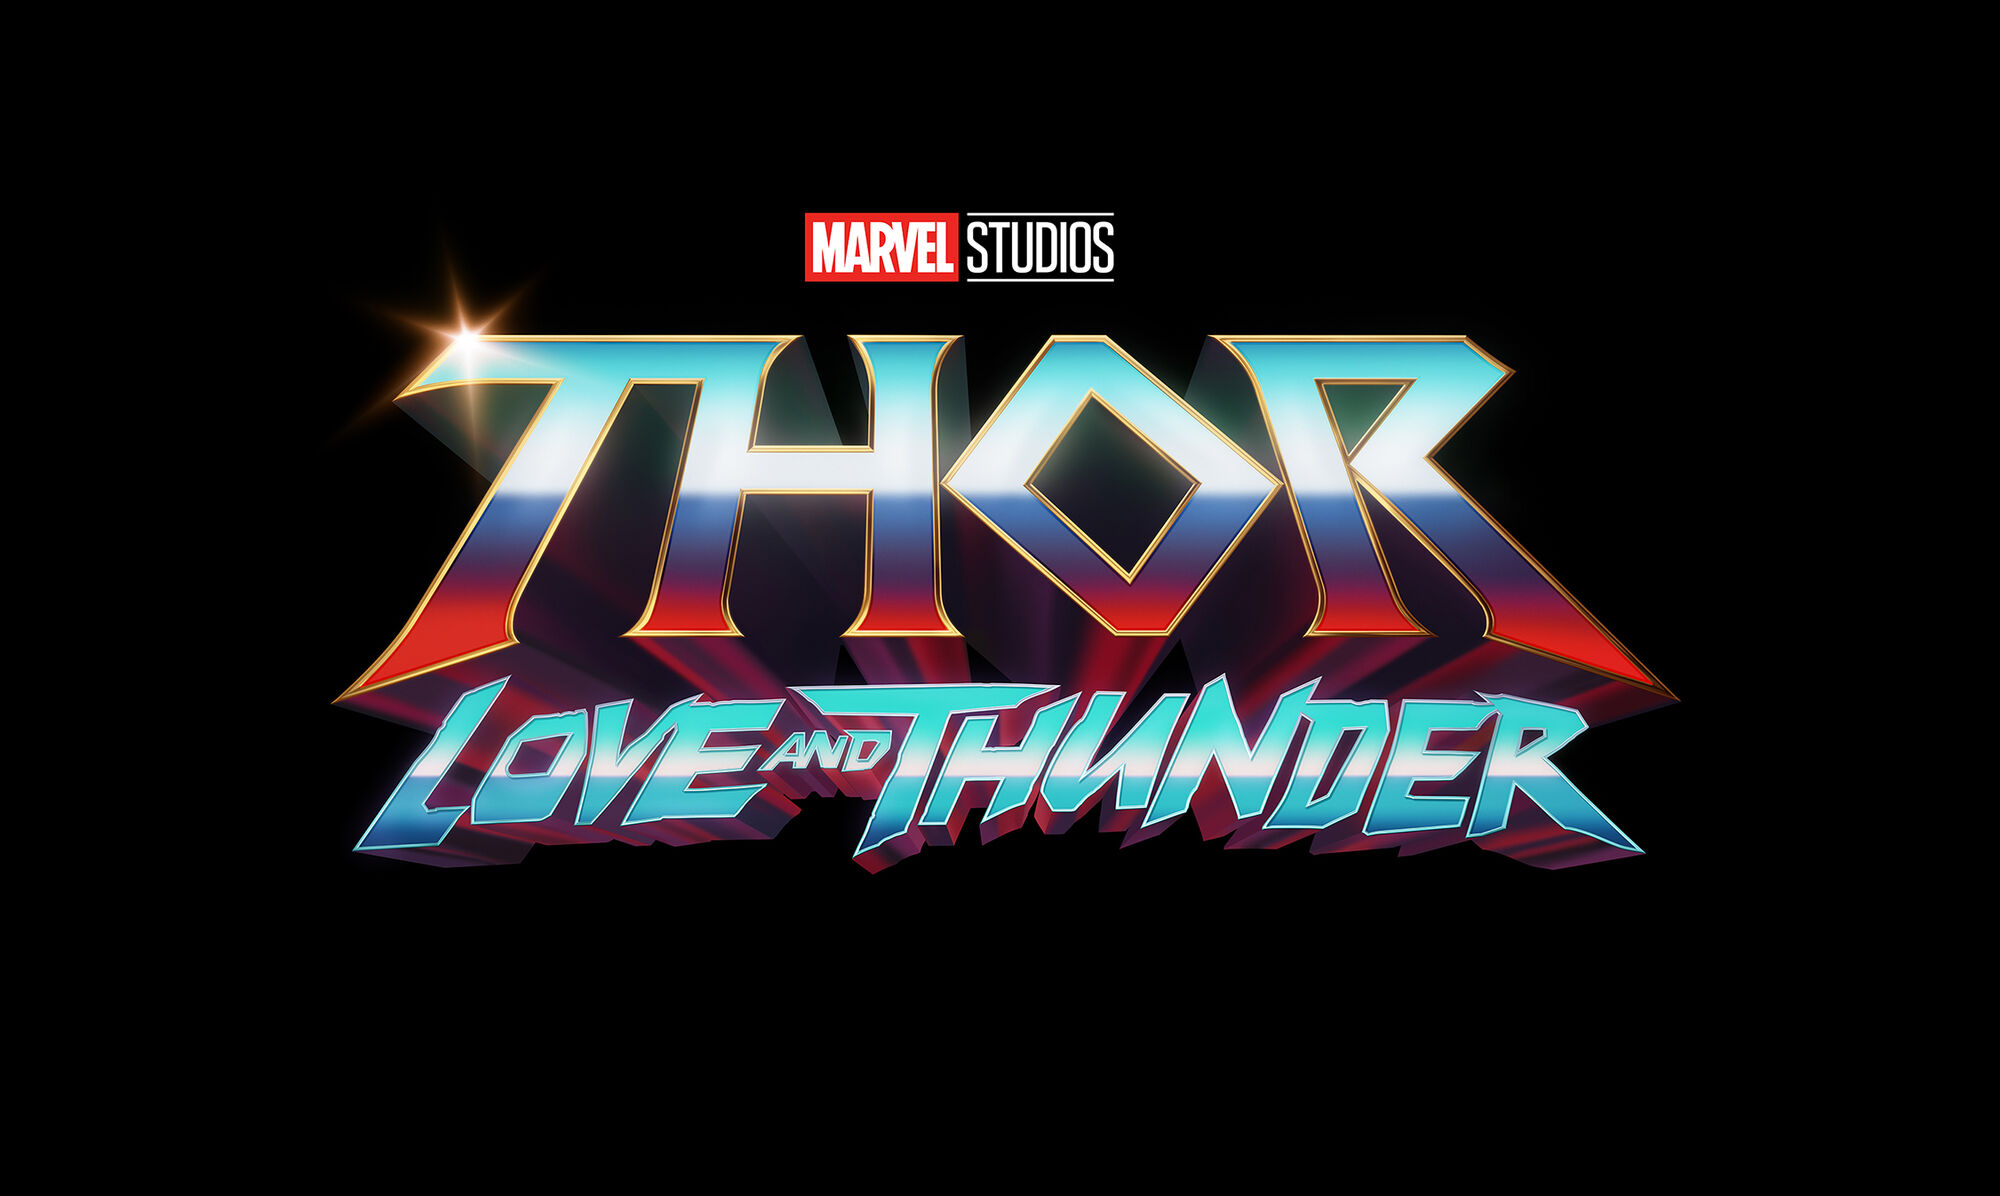 Thor: Love and Thunder. Marvel Cinematic Universe